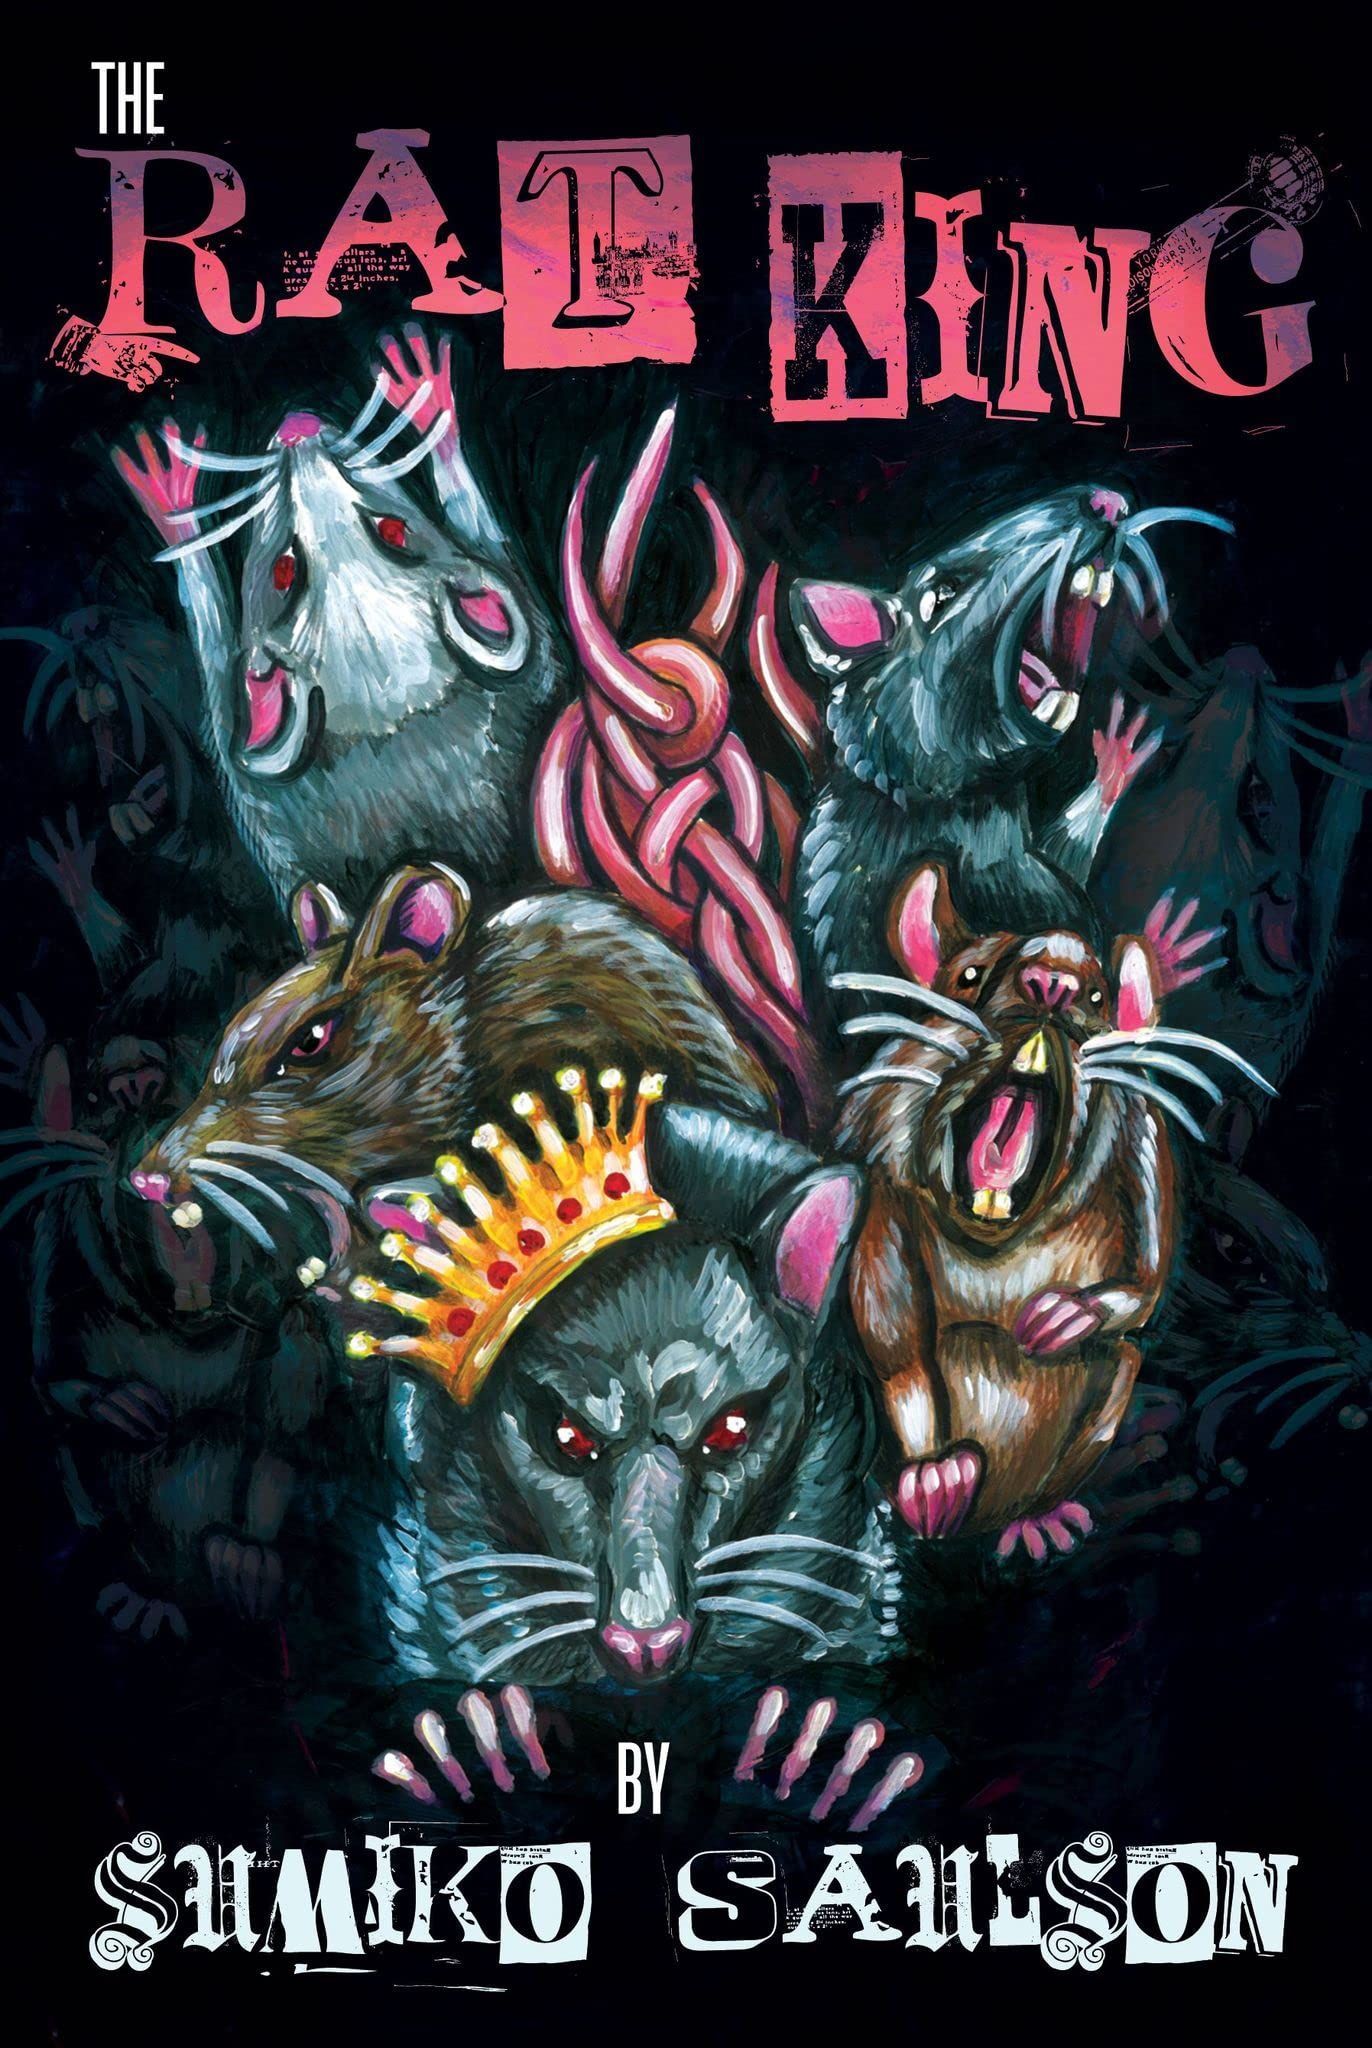 Cover of The Rat King by Sumko Saulson